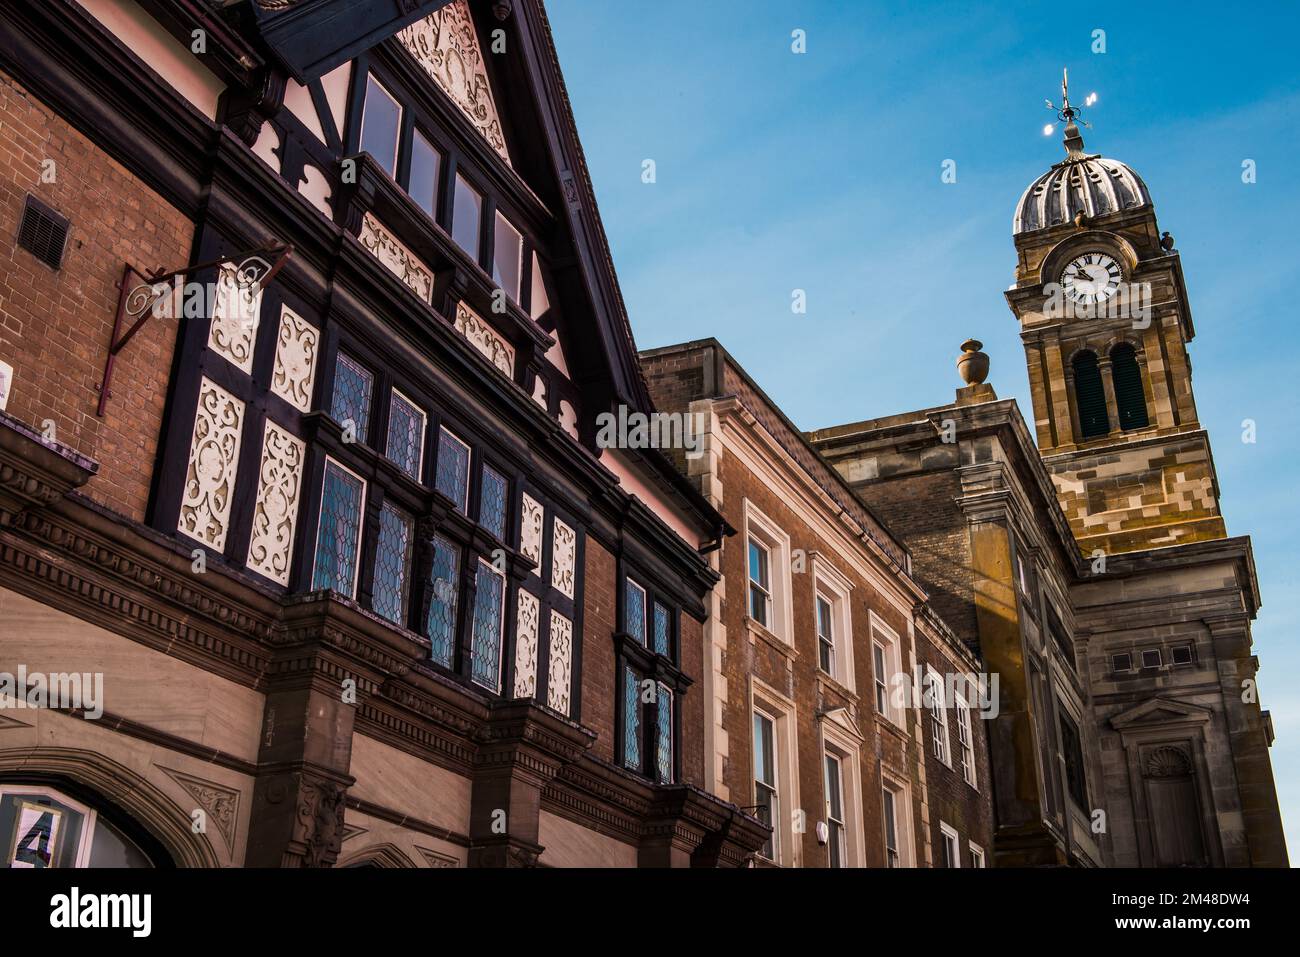 Tudor building in the city of Derby, East Midlands, UK Stock Photo